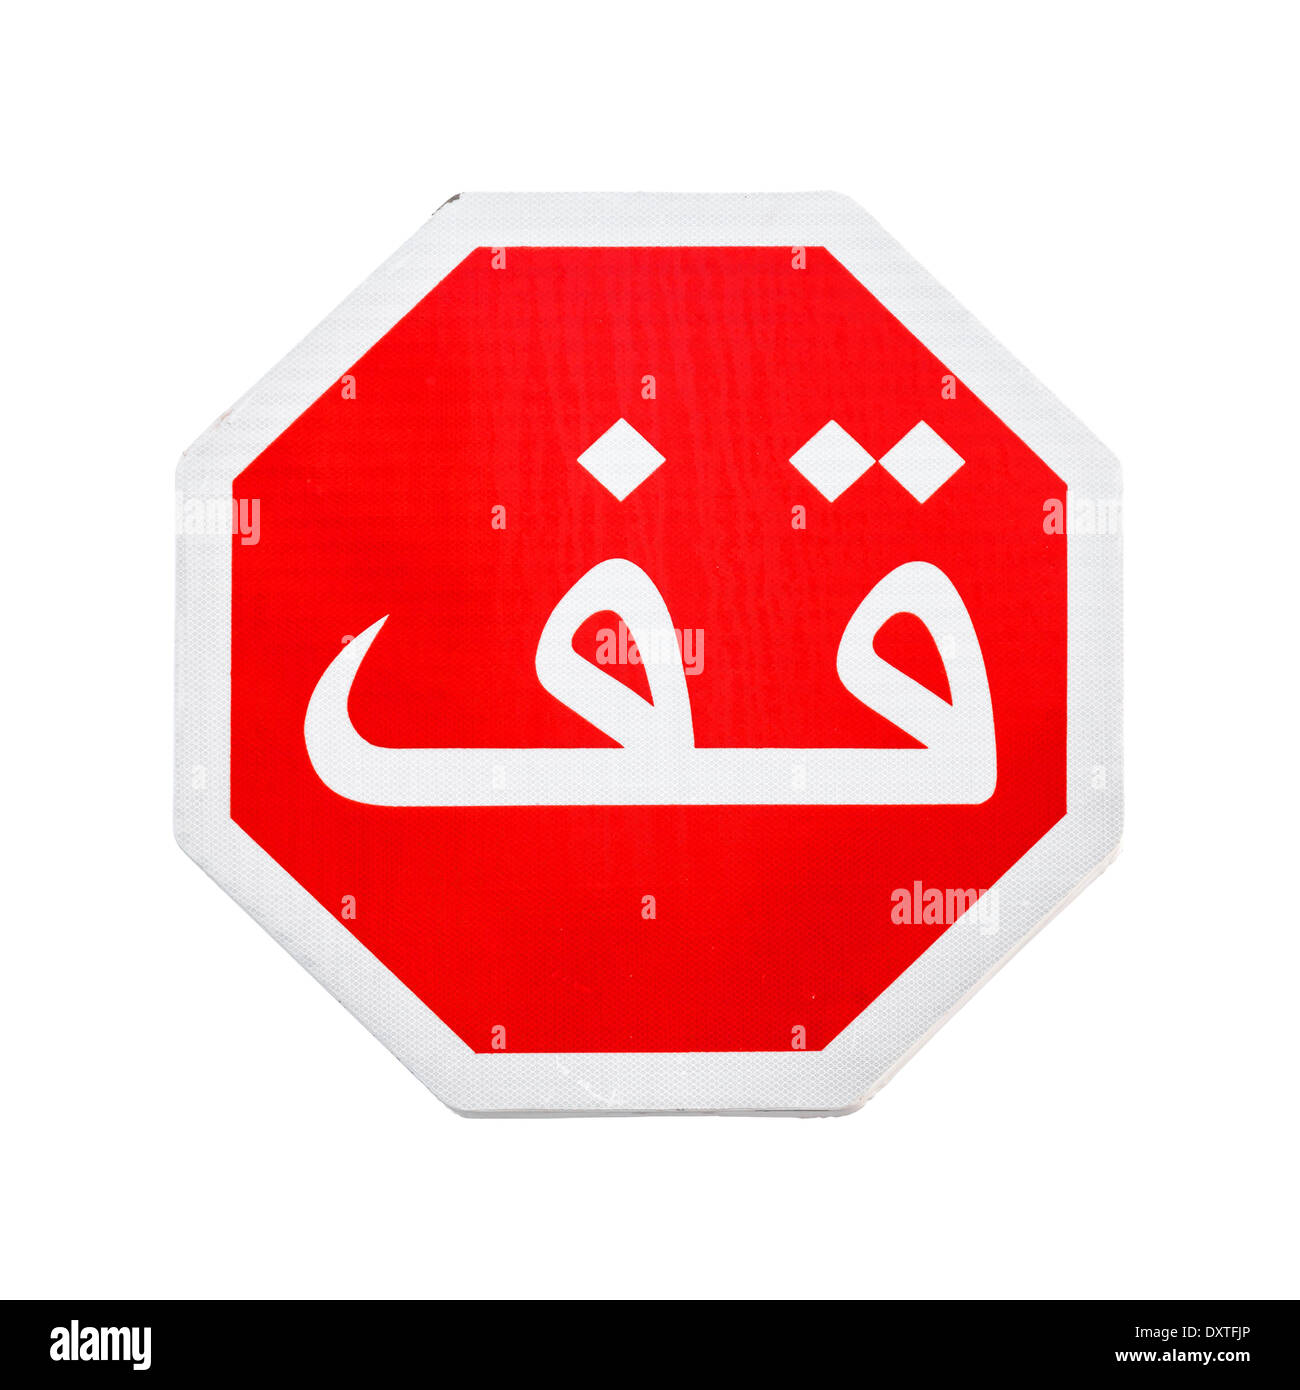 Red stop road sign with Arabic text label isolated on white Stock Photo